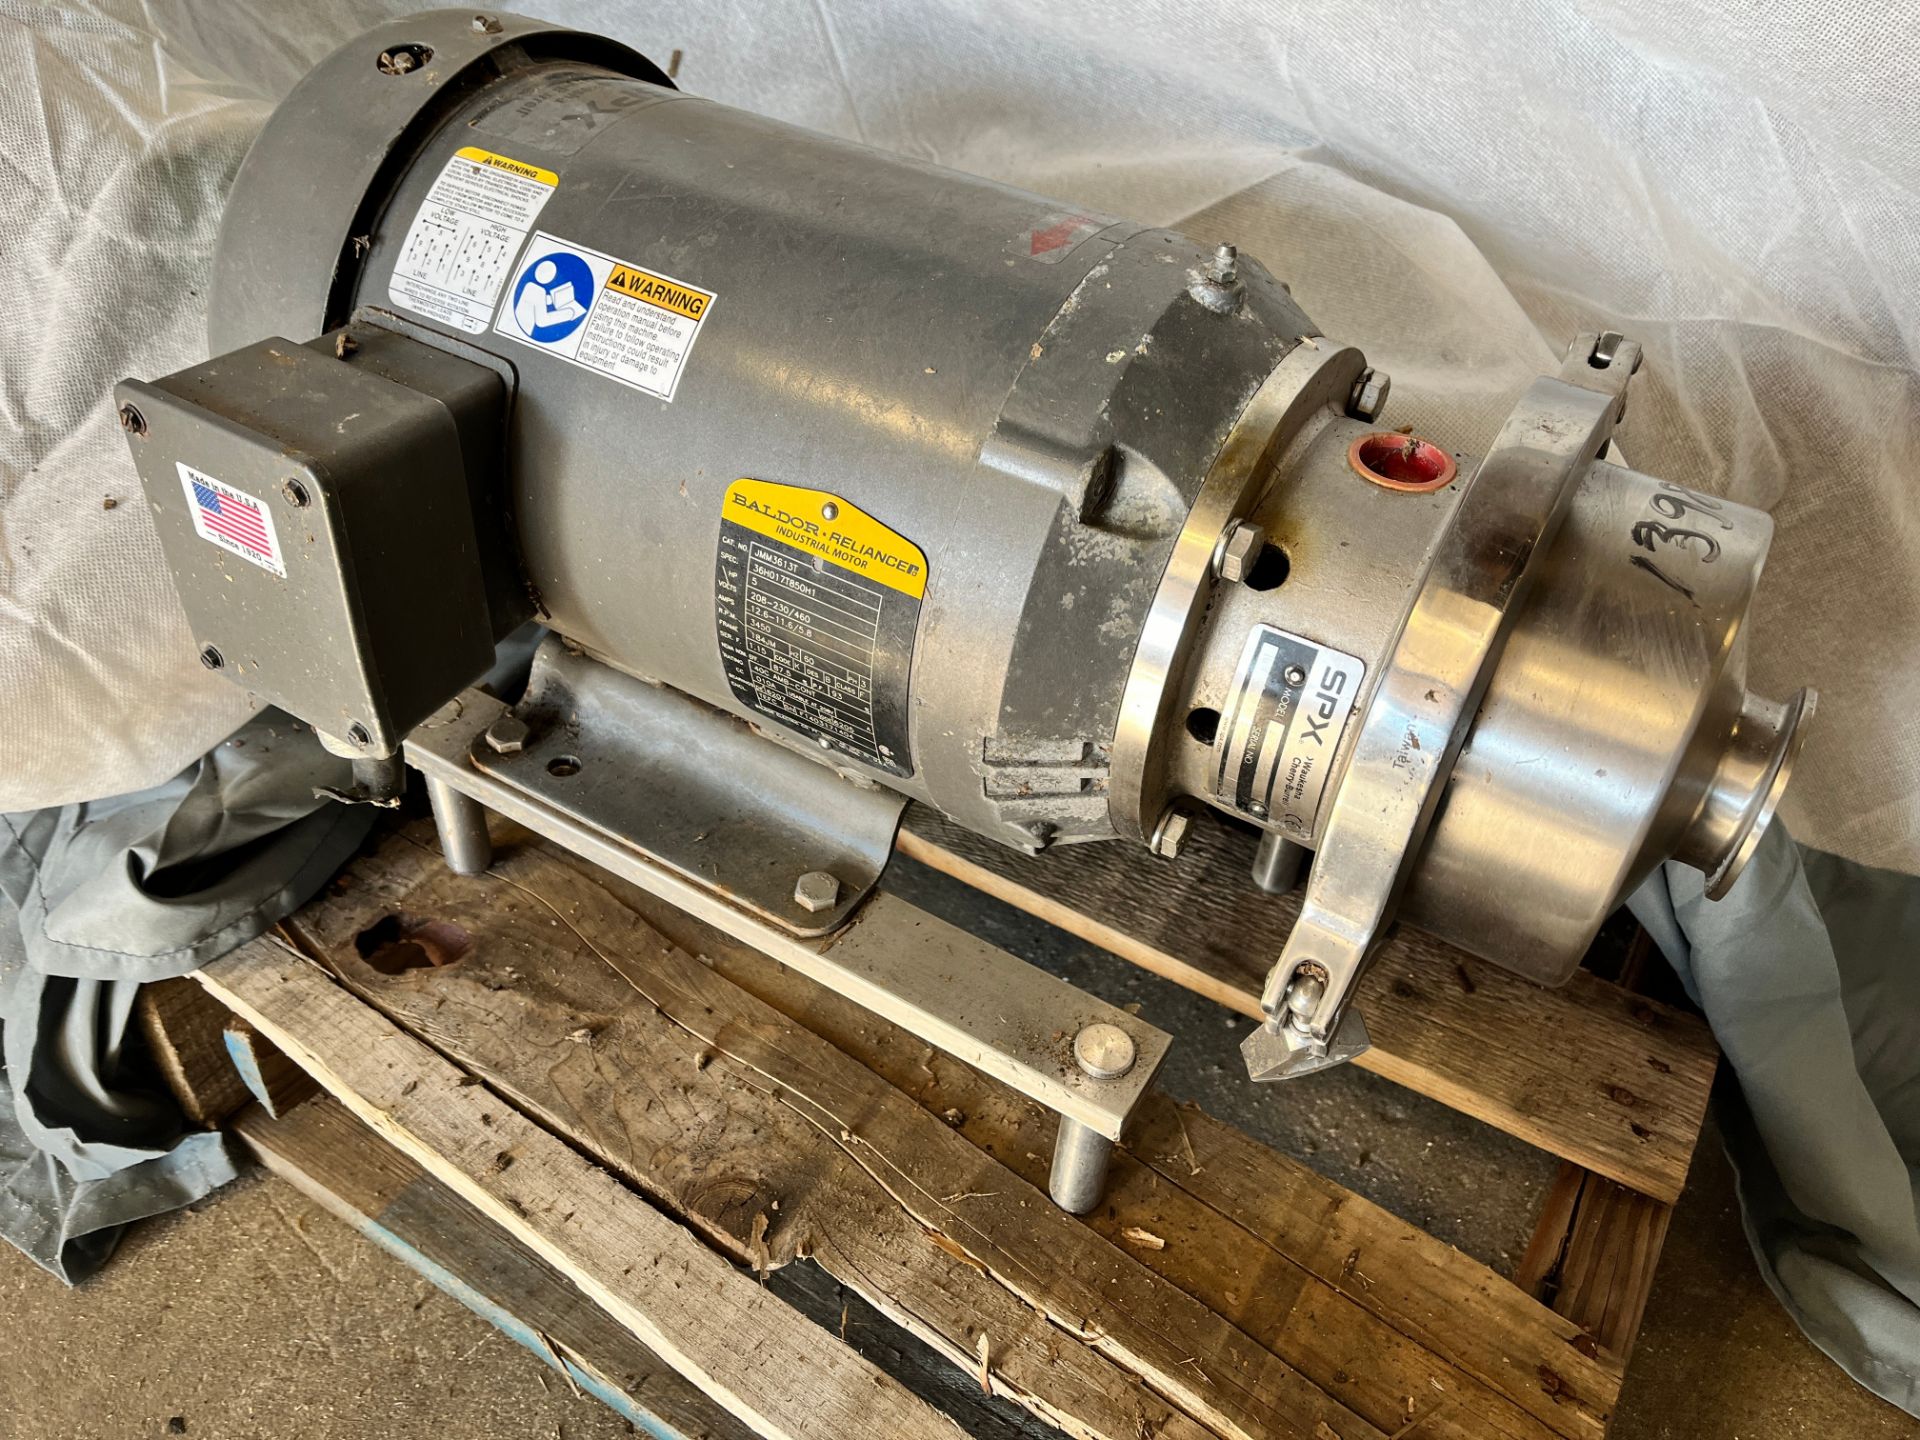 Used Sanitary Stainless Steel Centrifugal Pump 2 X 1 X 4.5. Built by SPX. 5 Hp Motor. (Item #13980-